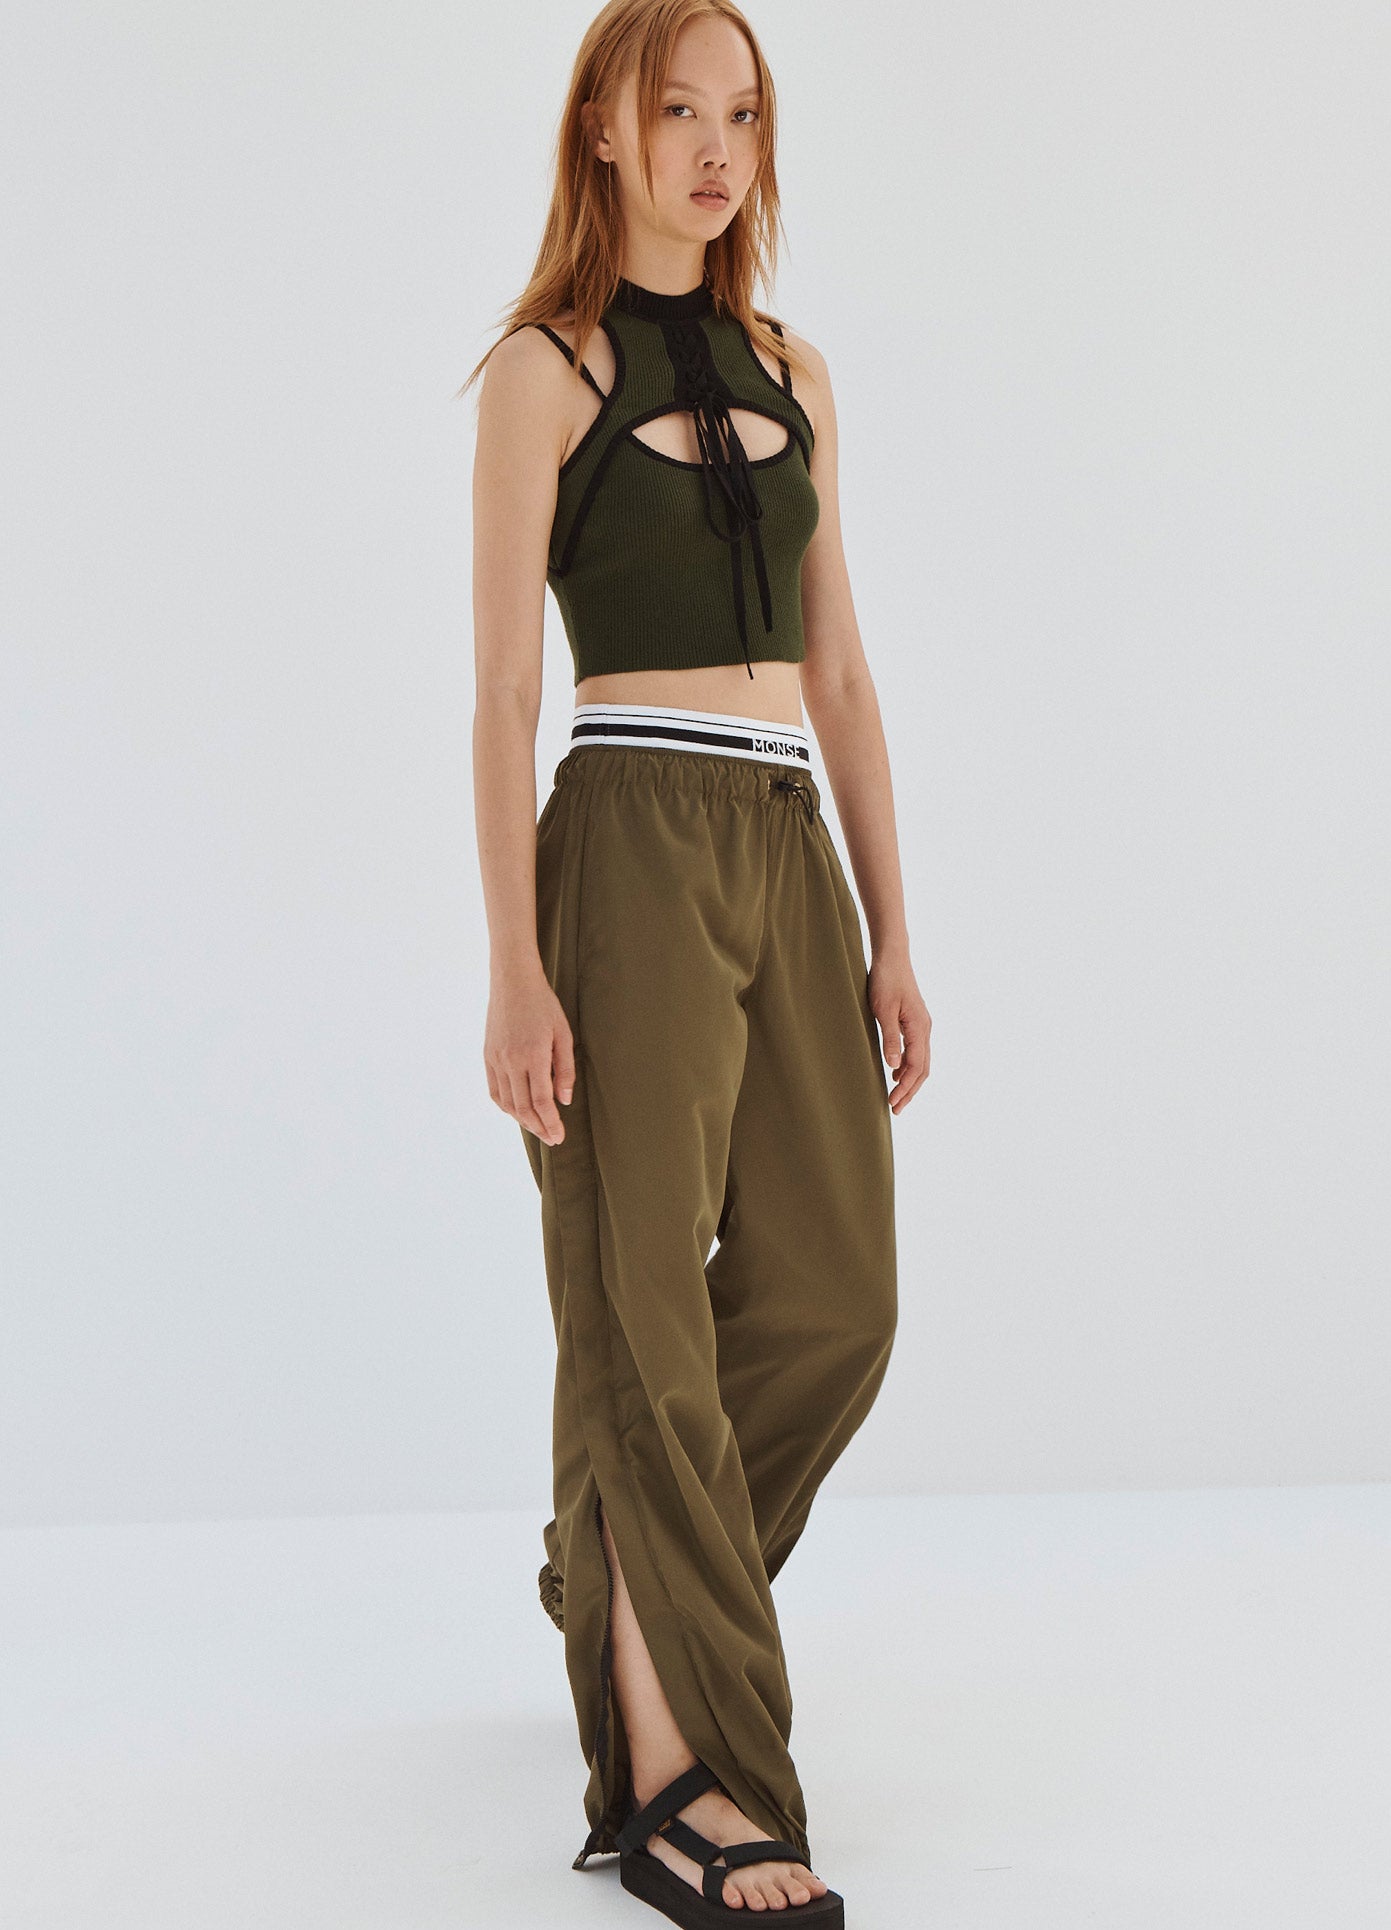 MONSE Double Waistband Track Pants in Olive on Model Walking Angled Full Front View